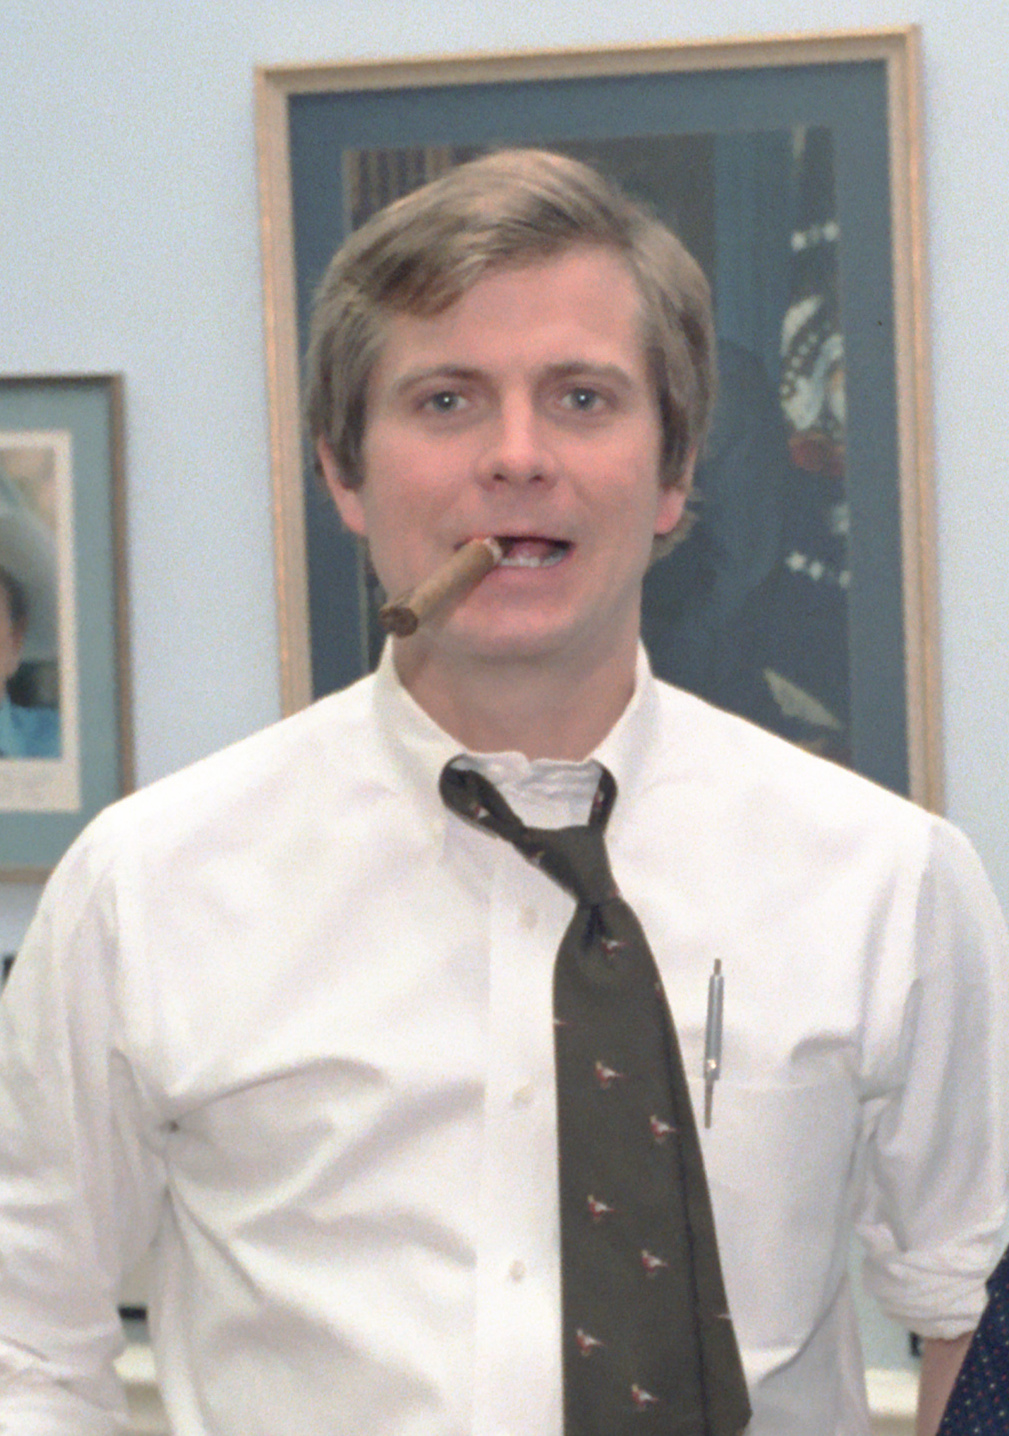 Lyn_Nofziger_Talking_with_Lee_Atwater_in_Nofzigers_Office_in_The_White_House_%28cropped%29.jpg